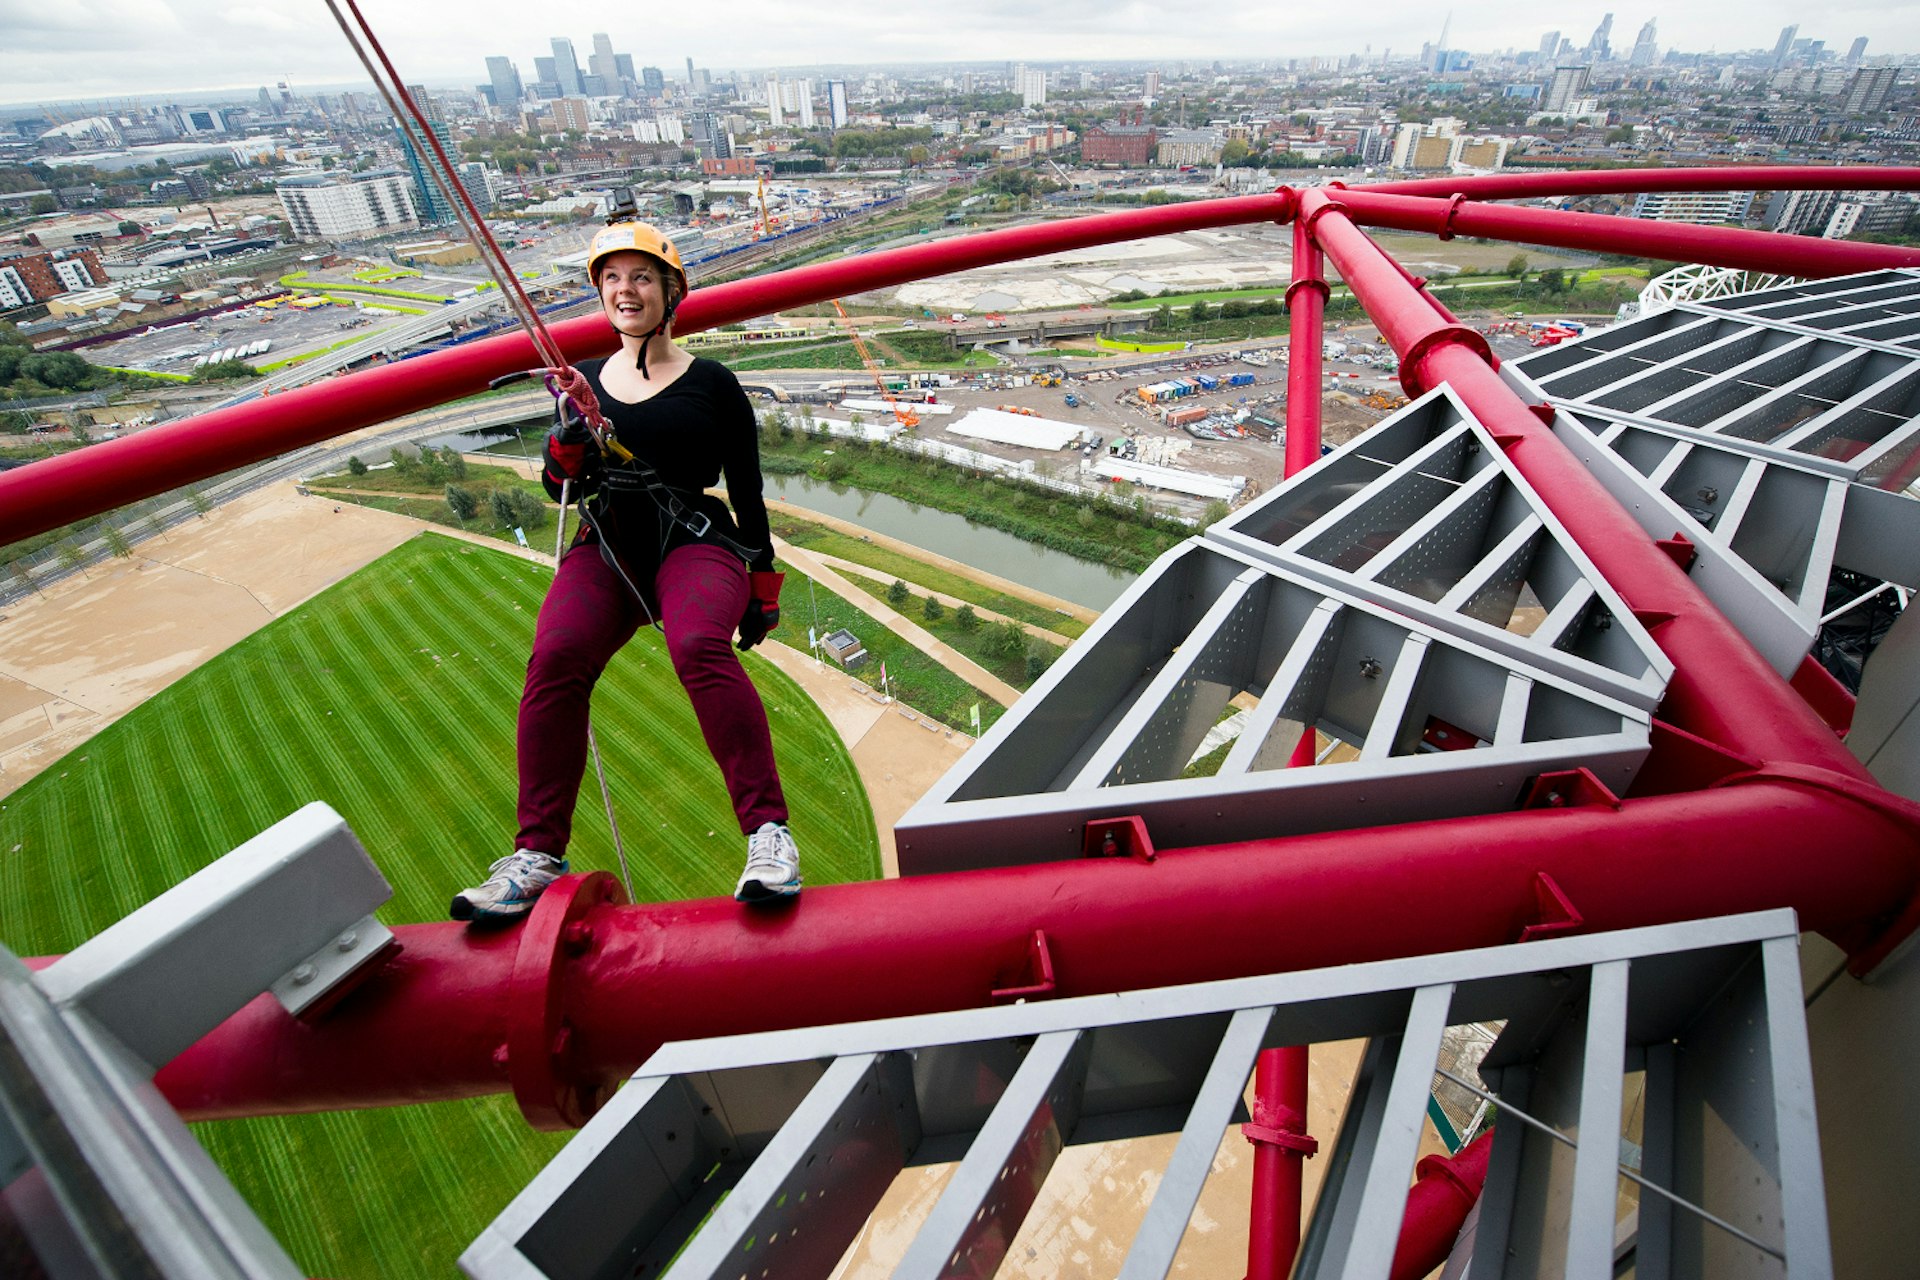 The Orbit offers views across London – if you're prepared to look down. Image by ArcelorMittal Orbit